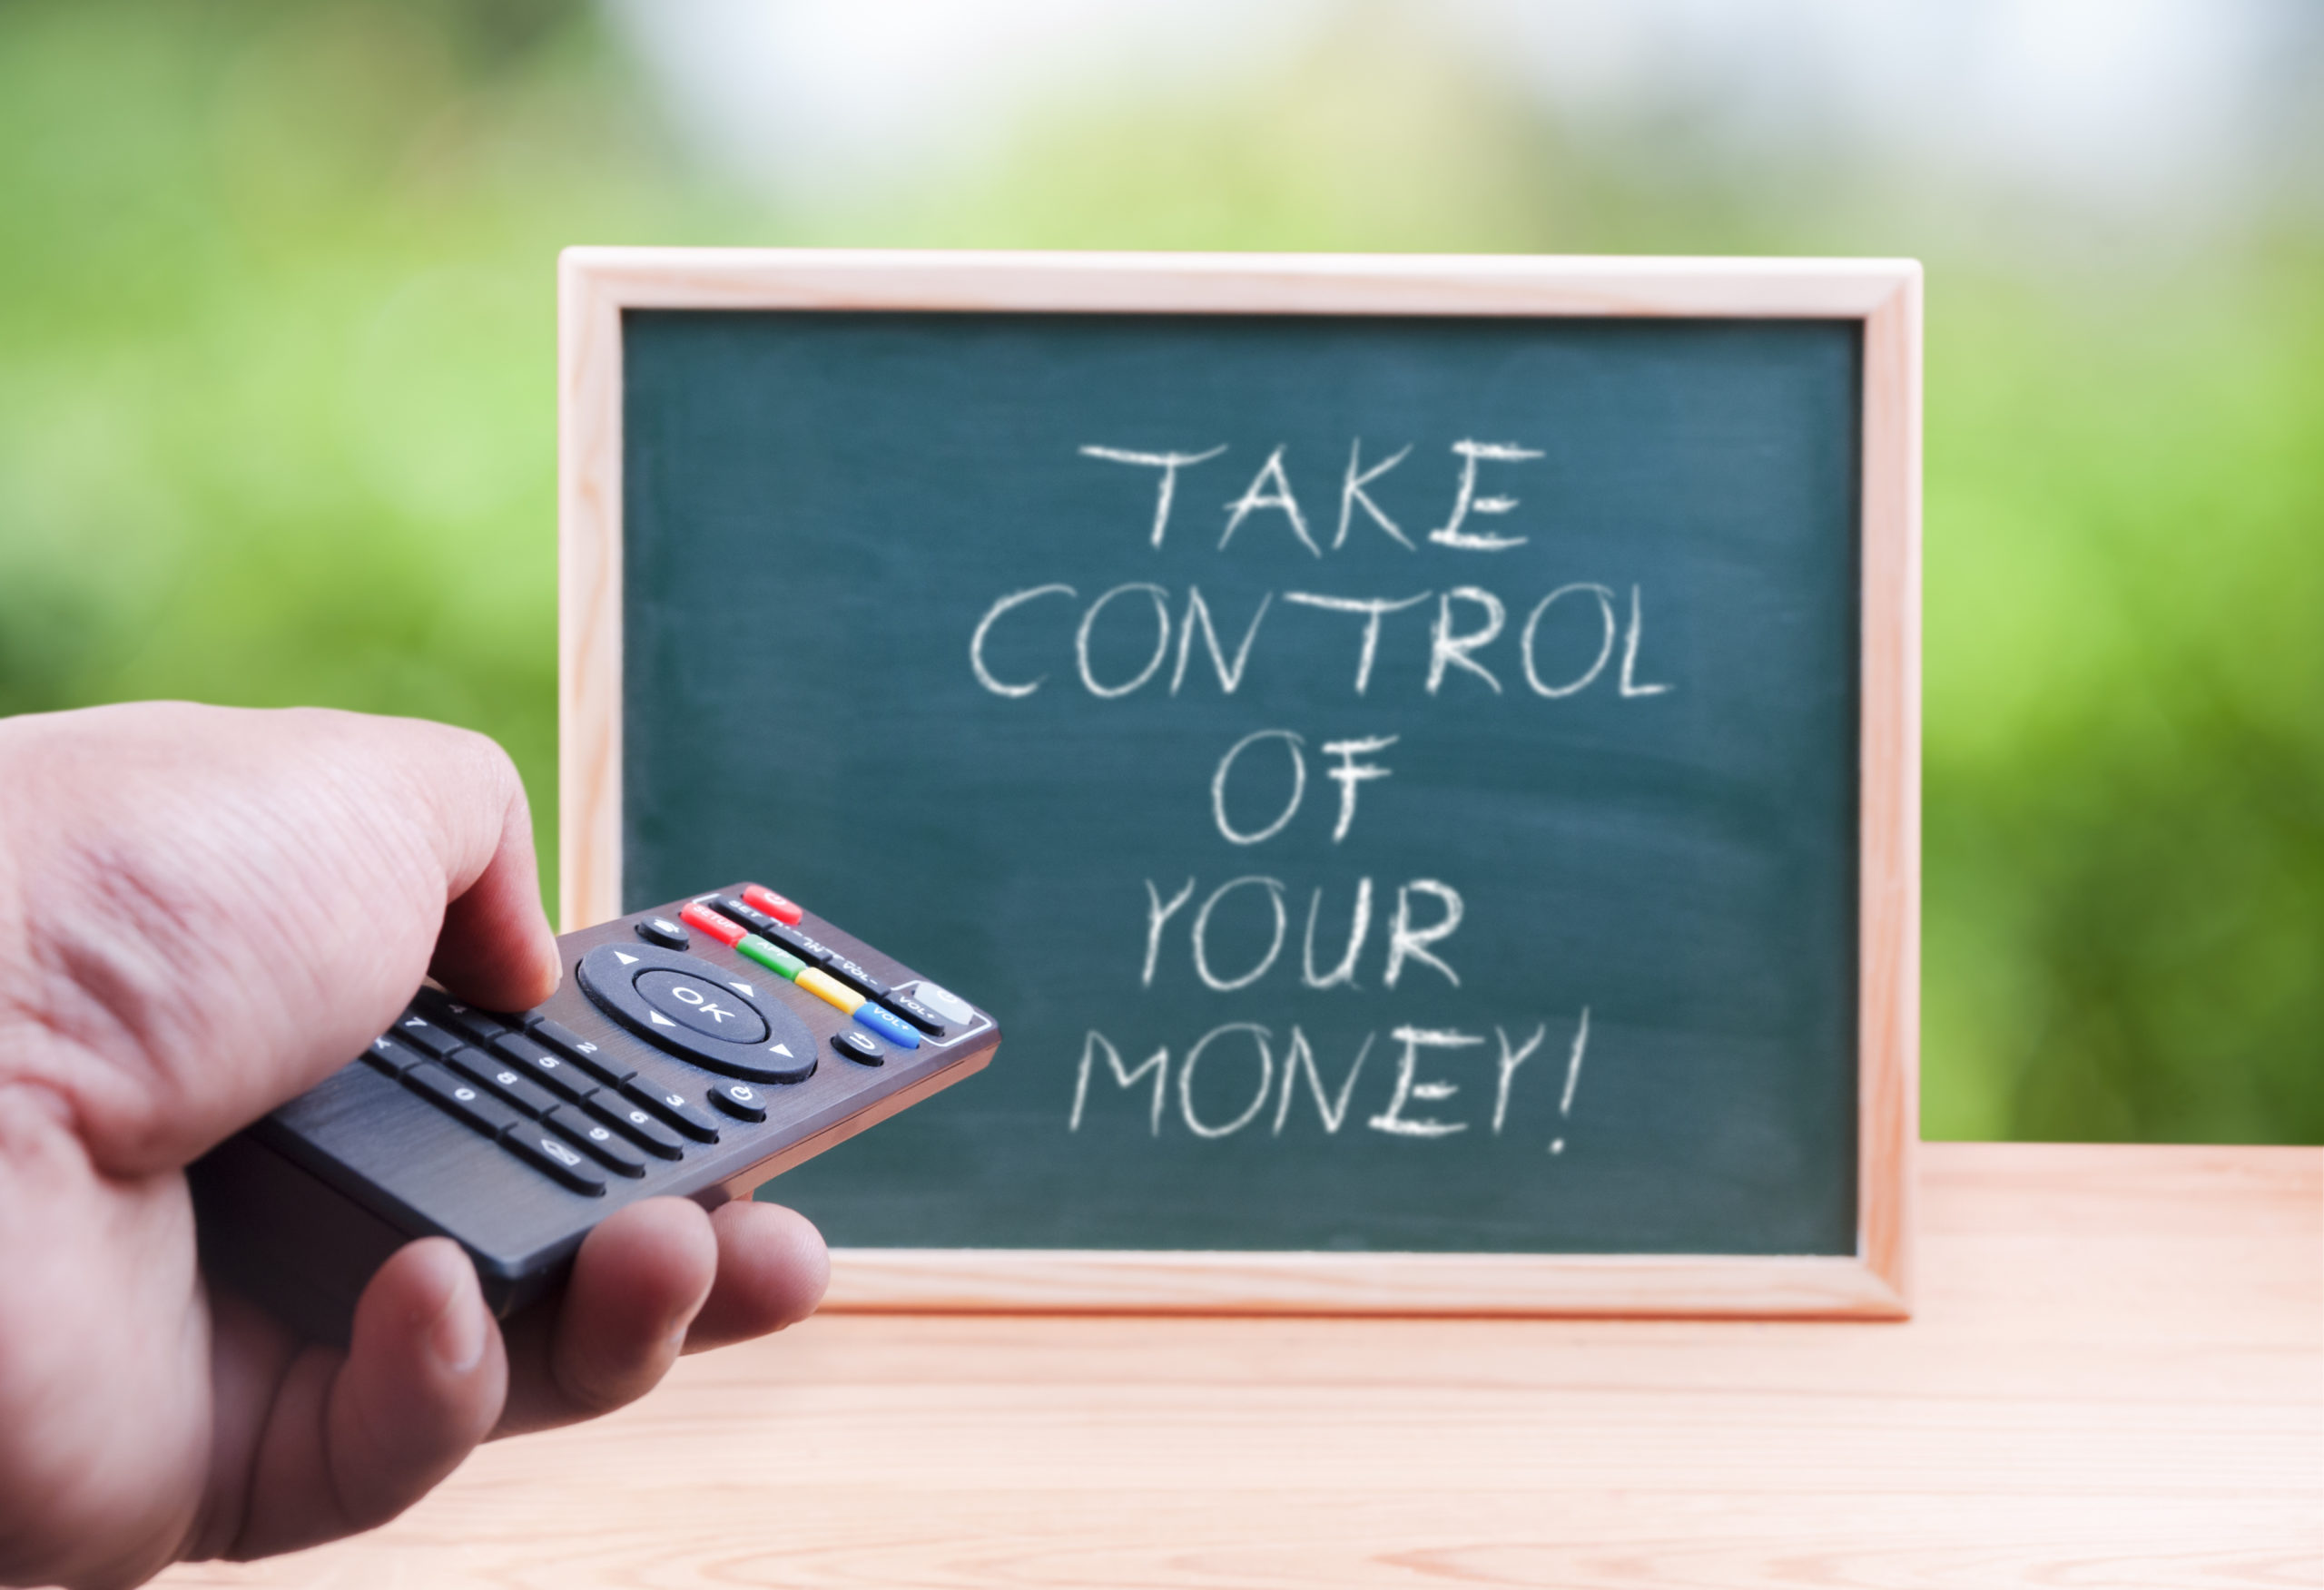 Hand holding a remote control device pointing at a blackboard with the words Take control of your money' on it